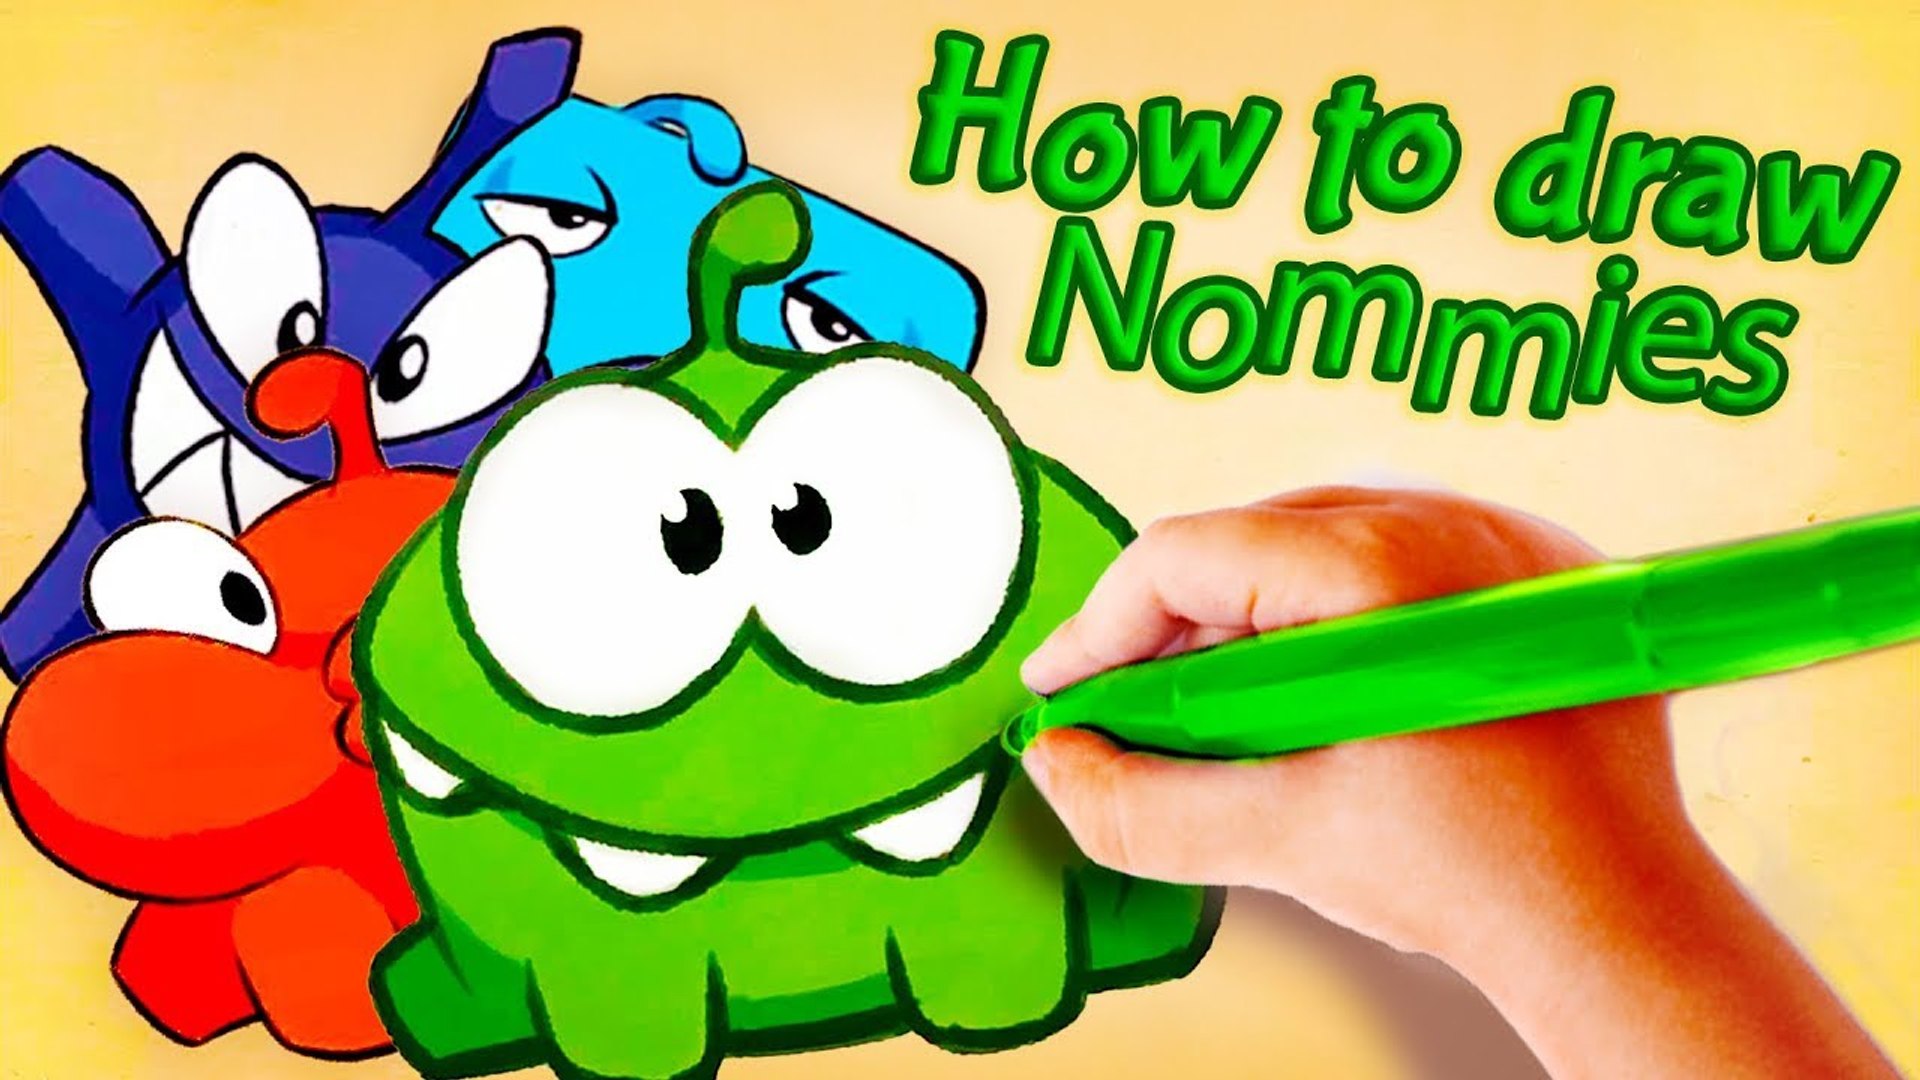 Om Nom Stories: How to Draw Small Om Nom from Cut the Rope Magic - Funny  cartoons for kids – Видео Dailymotion